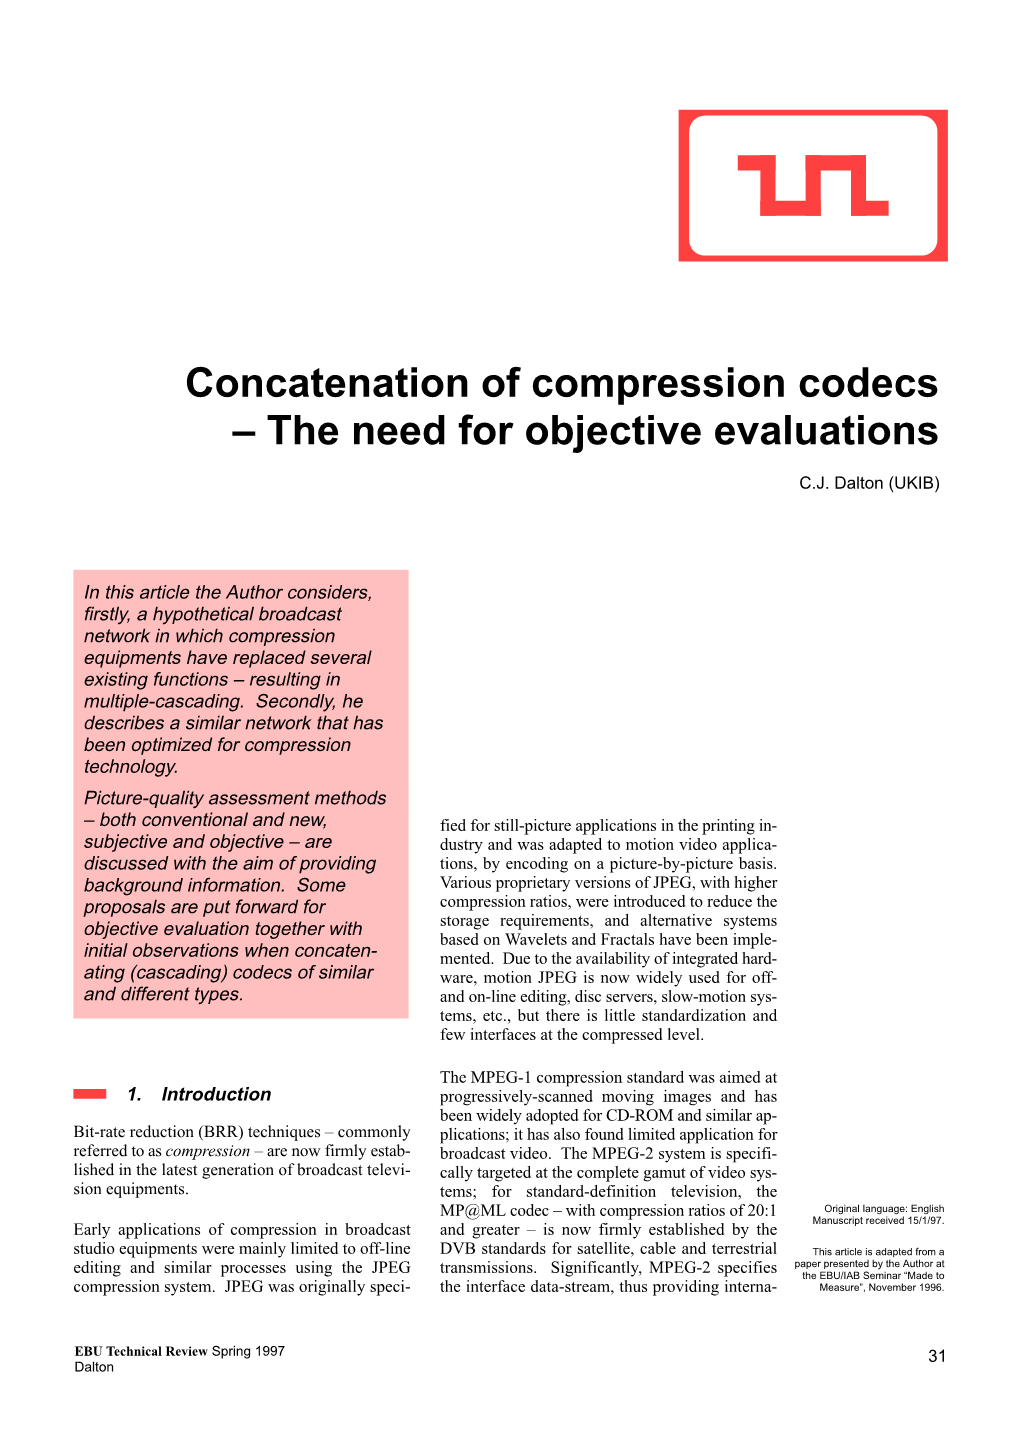 Concatenation of Compression Codecs – the Need for Objective Evaluations